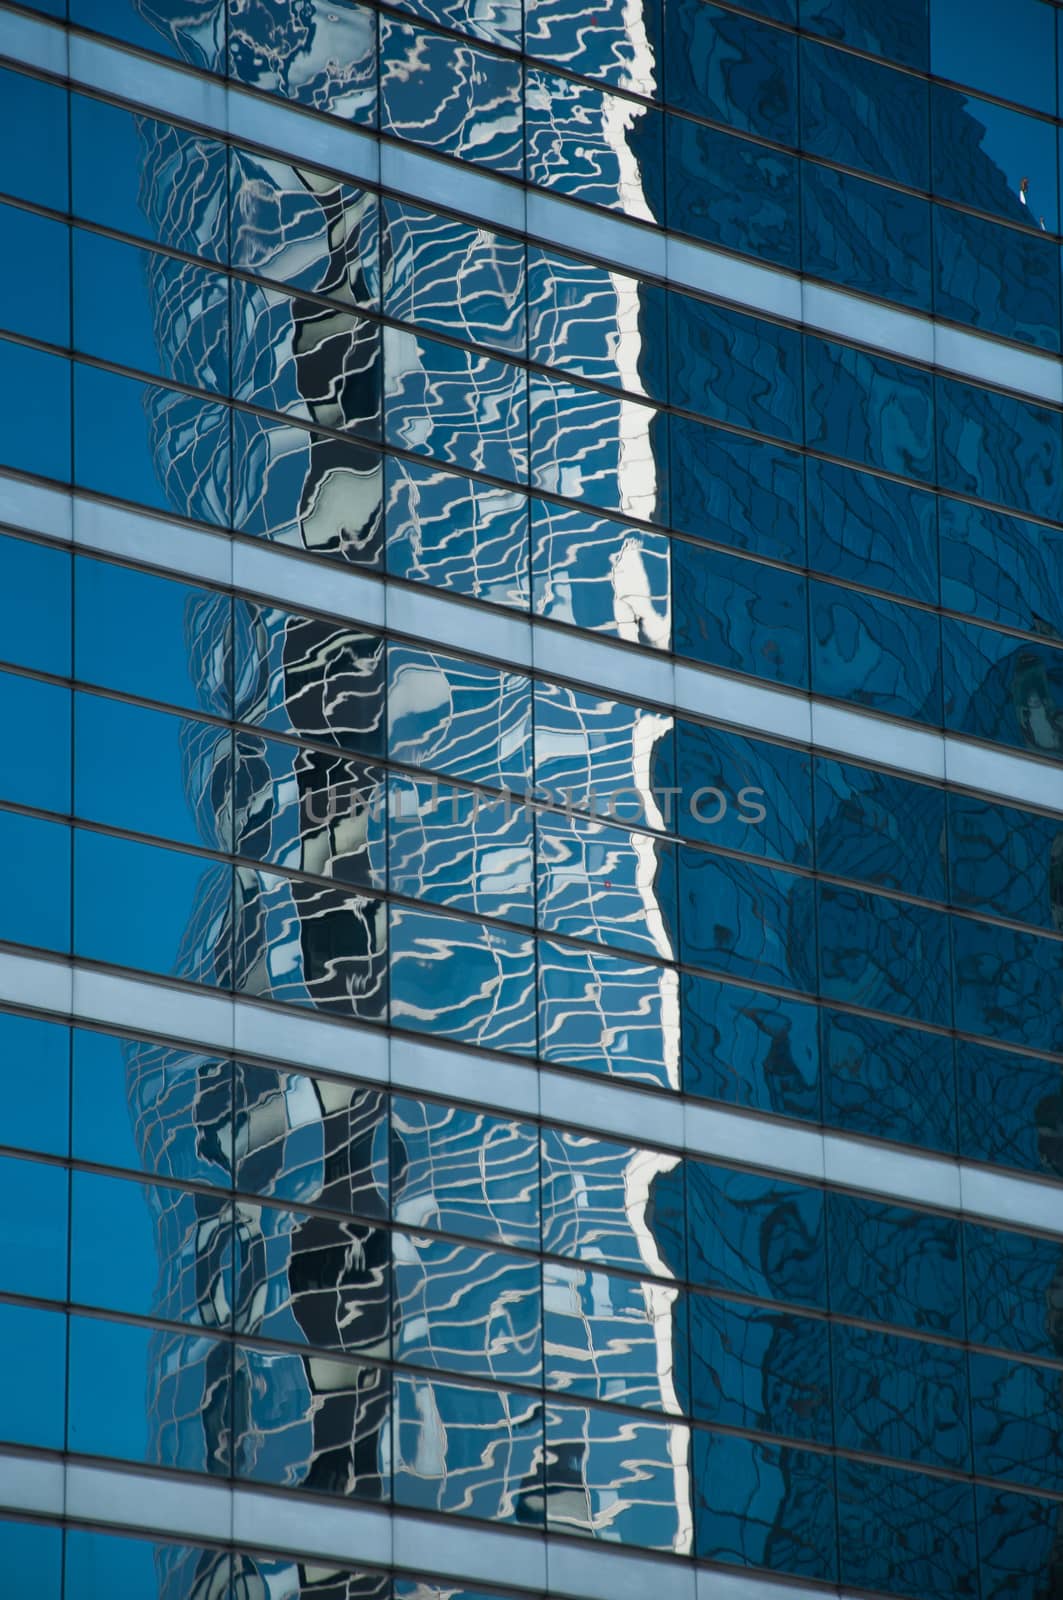 abstract architecture - windows and clouds reflexion